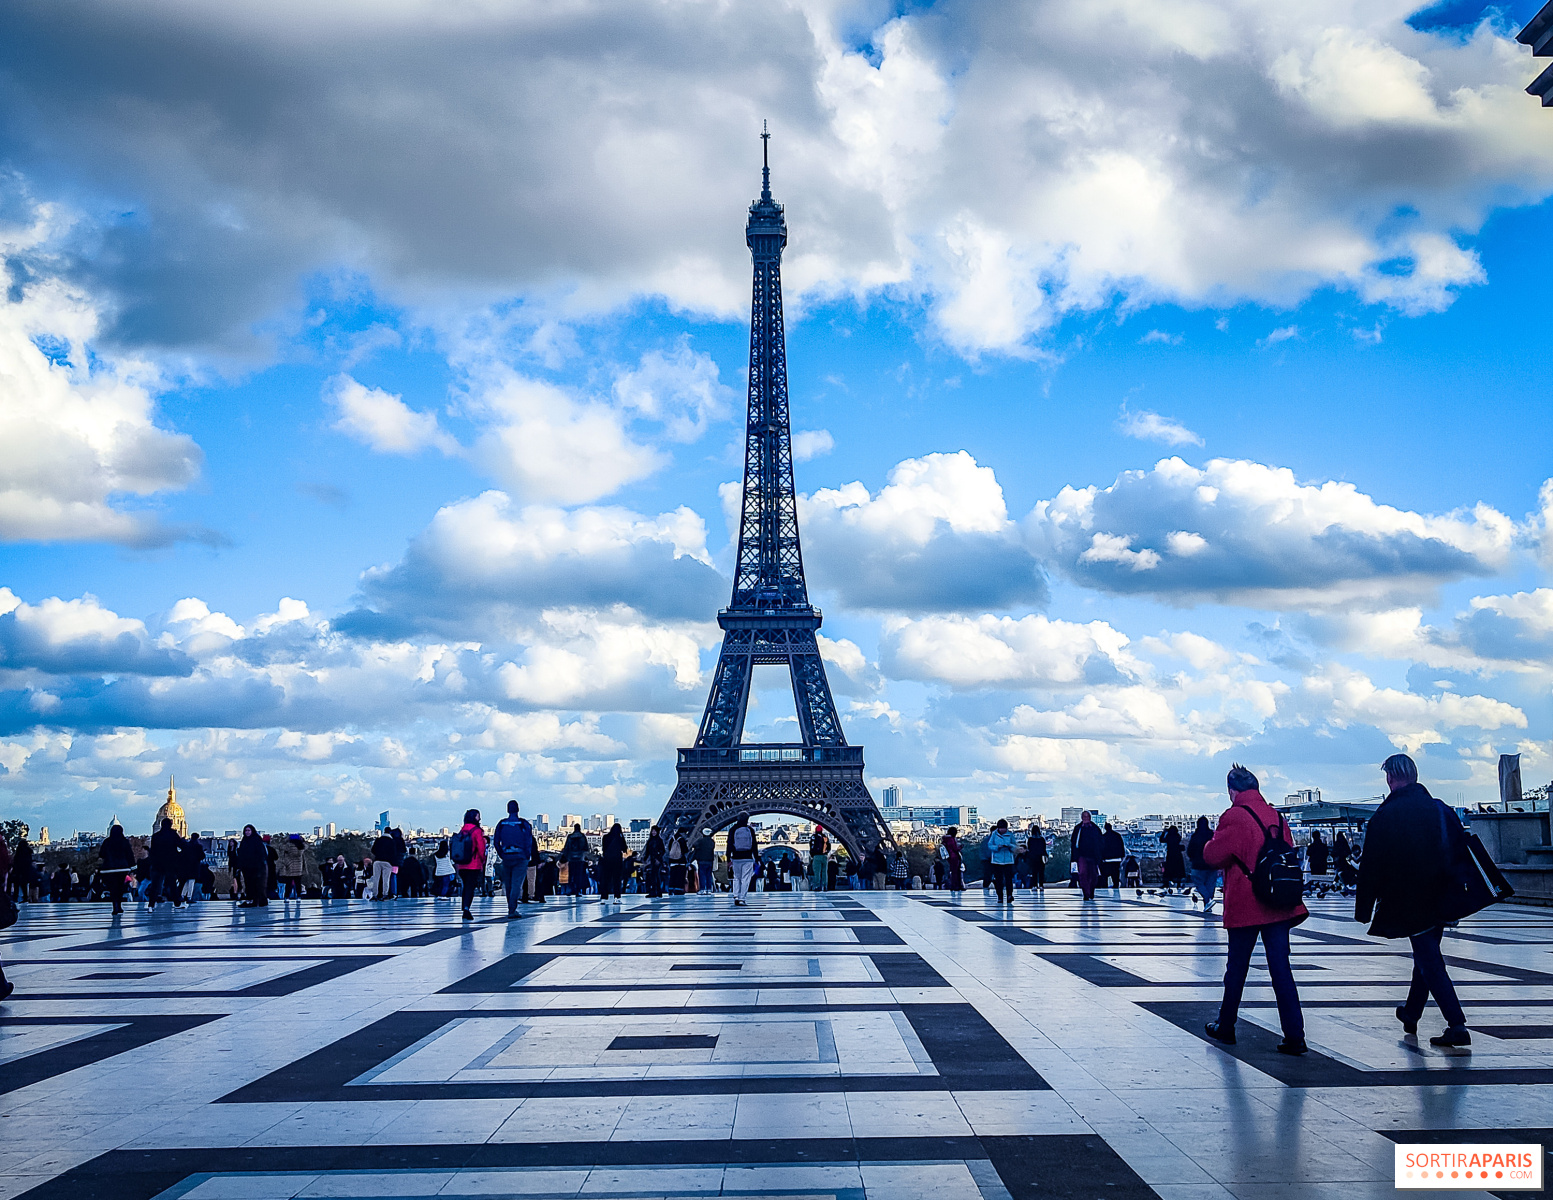 The Eiffel Tower: Paris's most iconic monument 